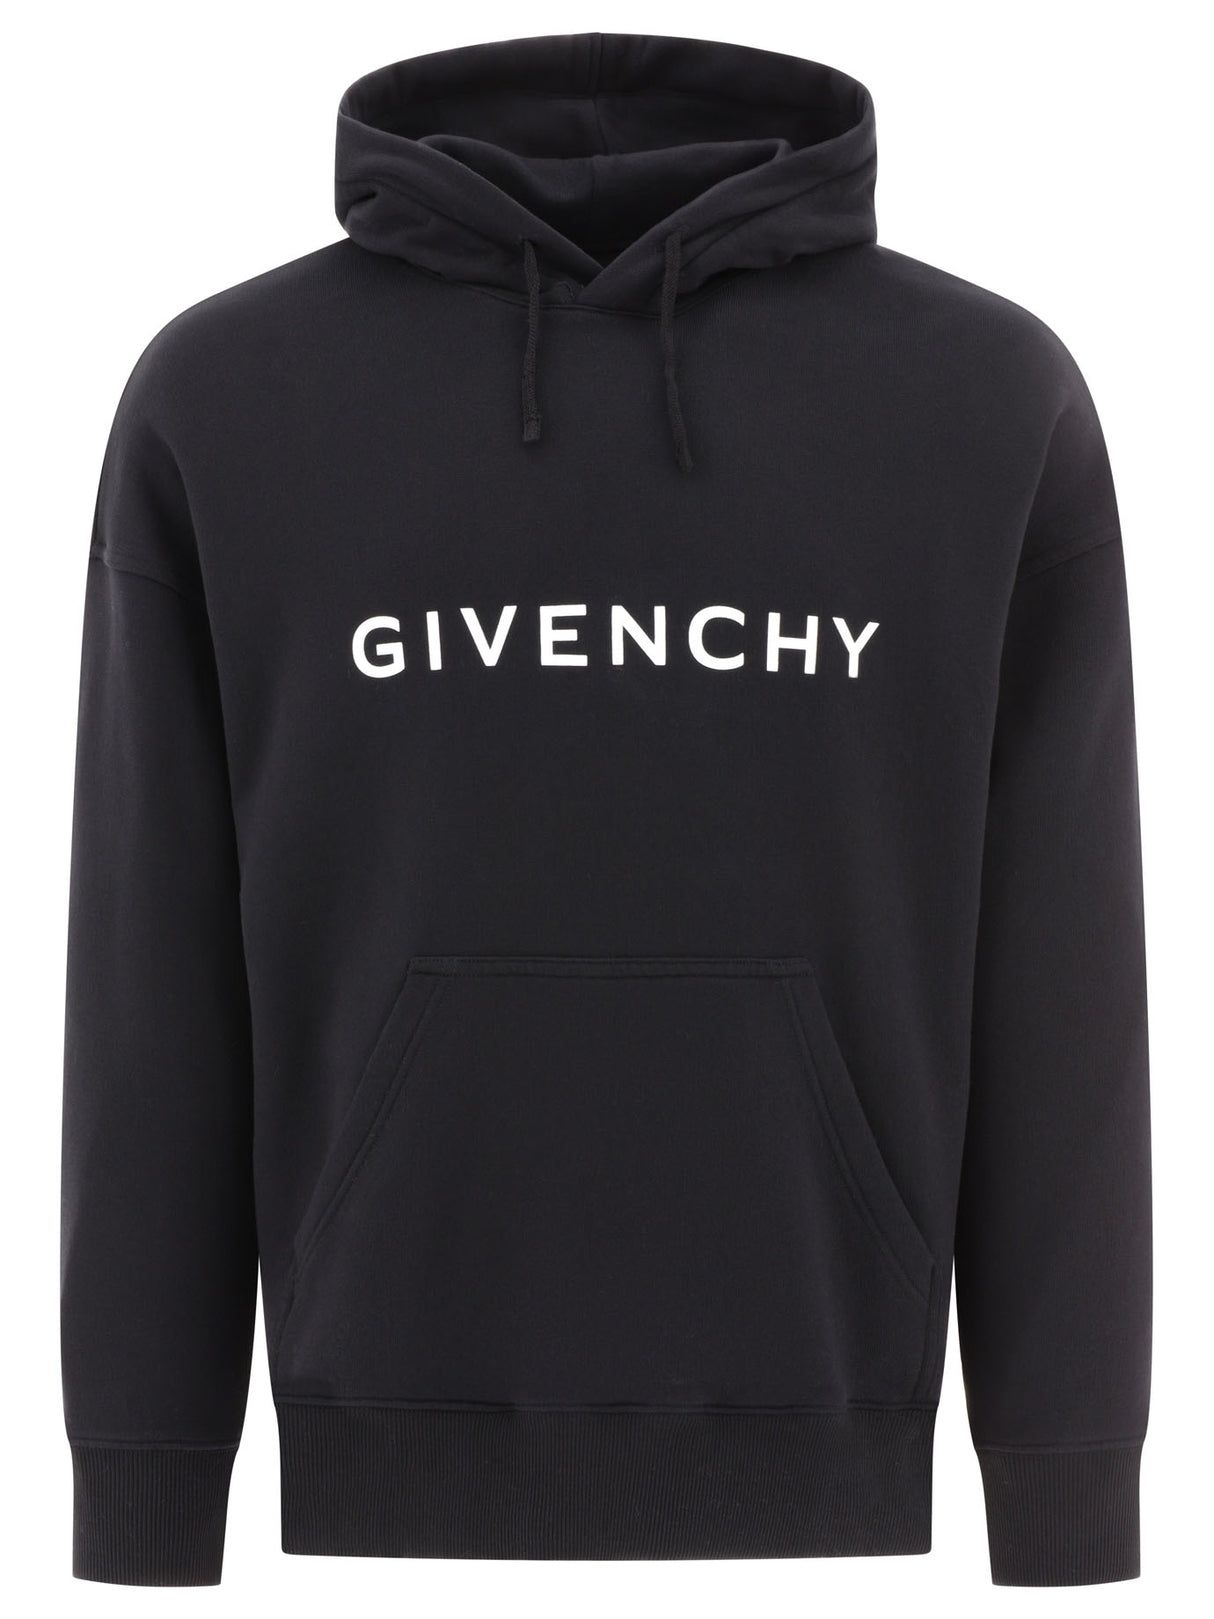 GIVENCHY Men's Black Hoodie with Signature Print and Drawstring